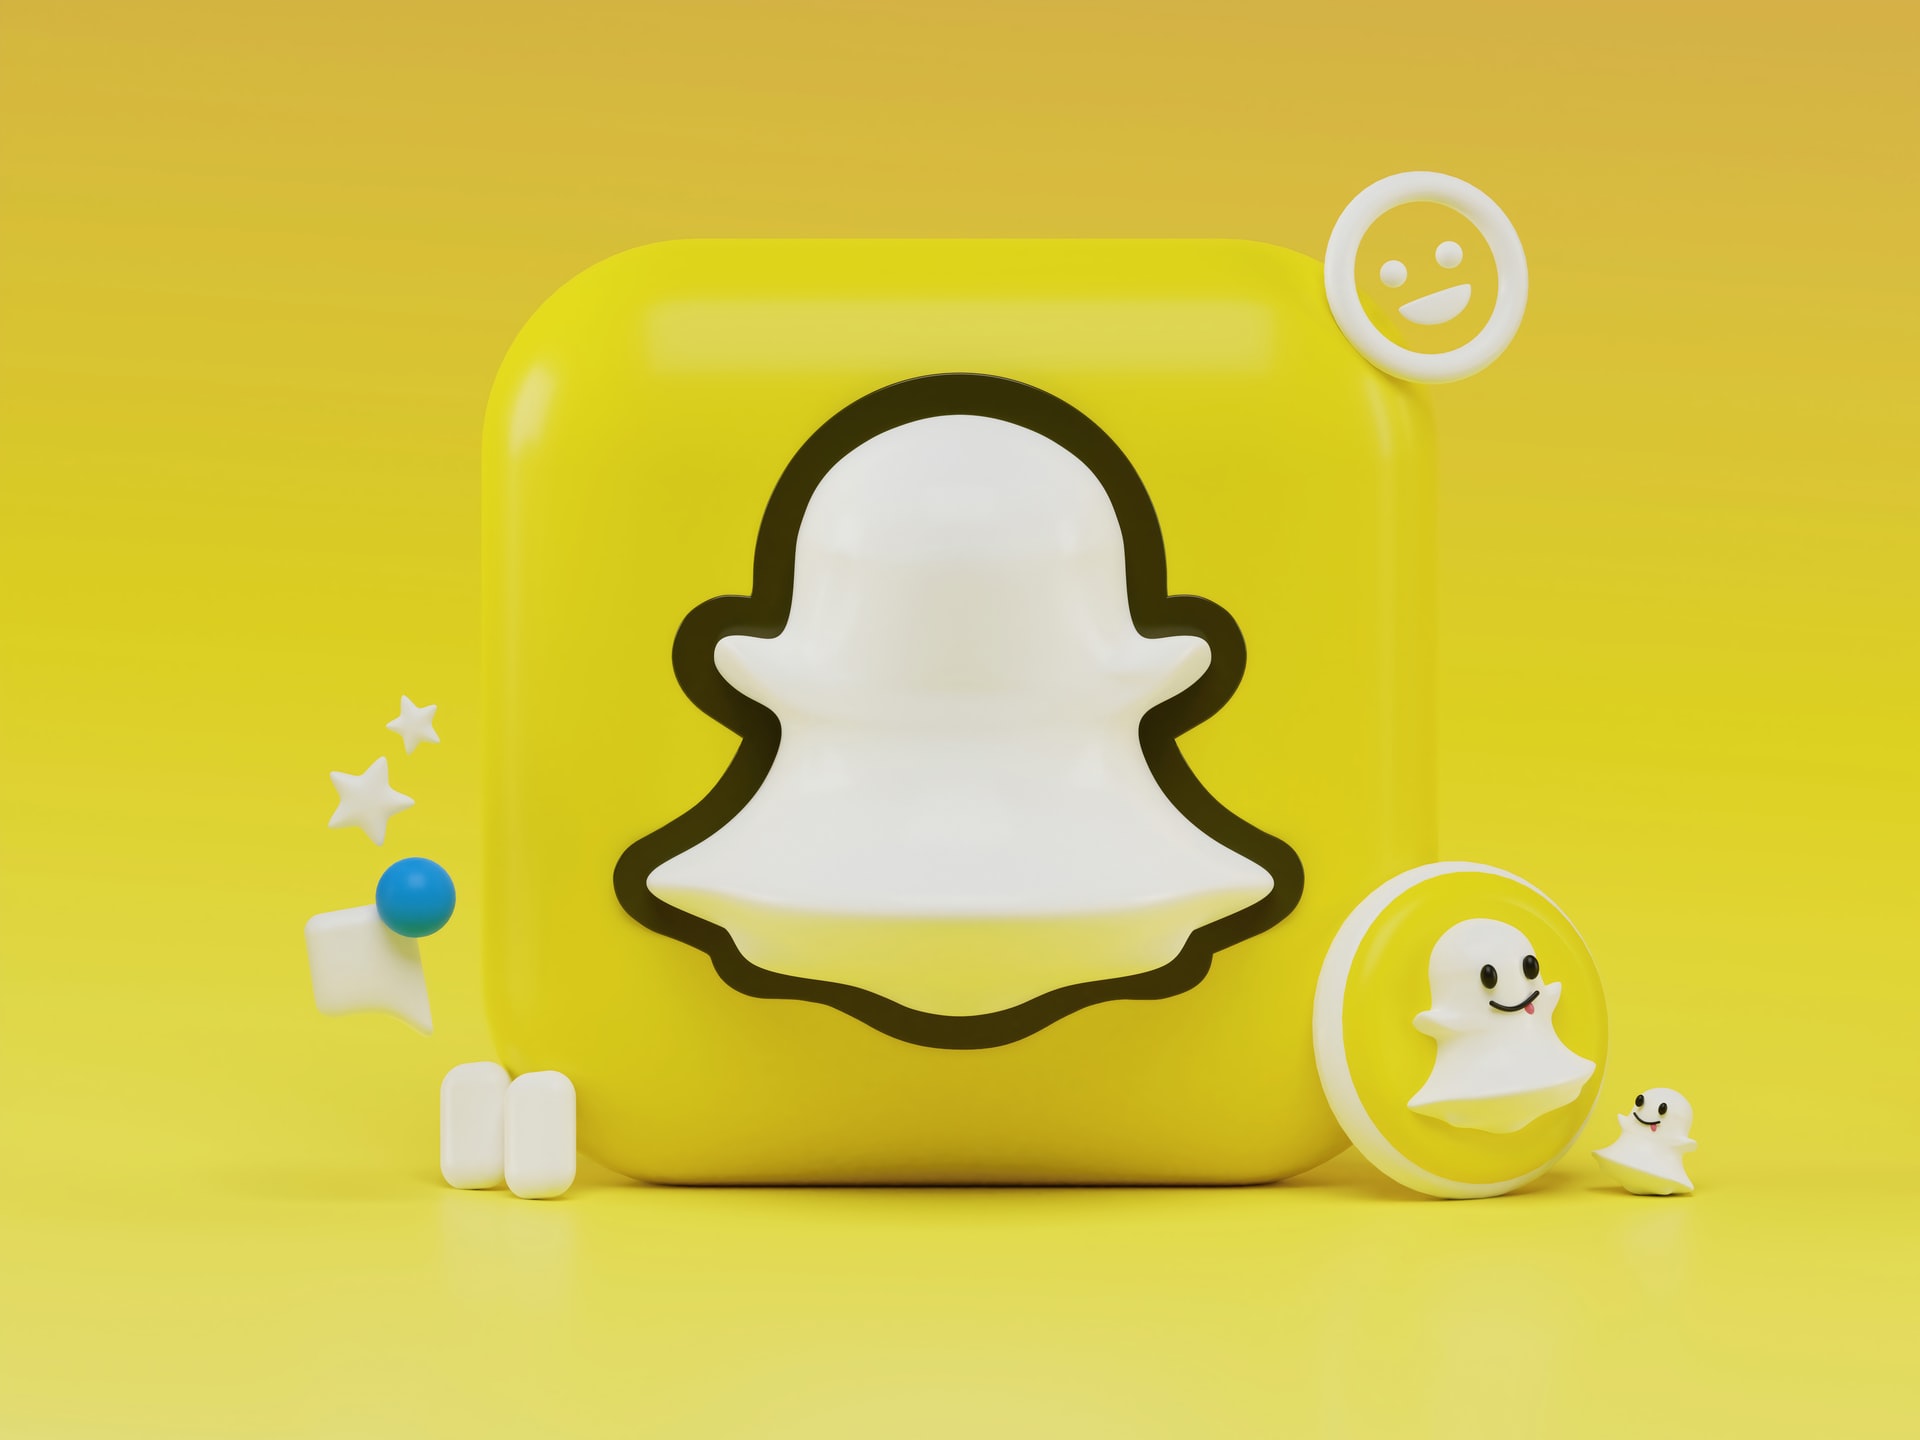 Snapchat has established a new deal with Universal Music Group (UMG)